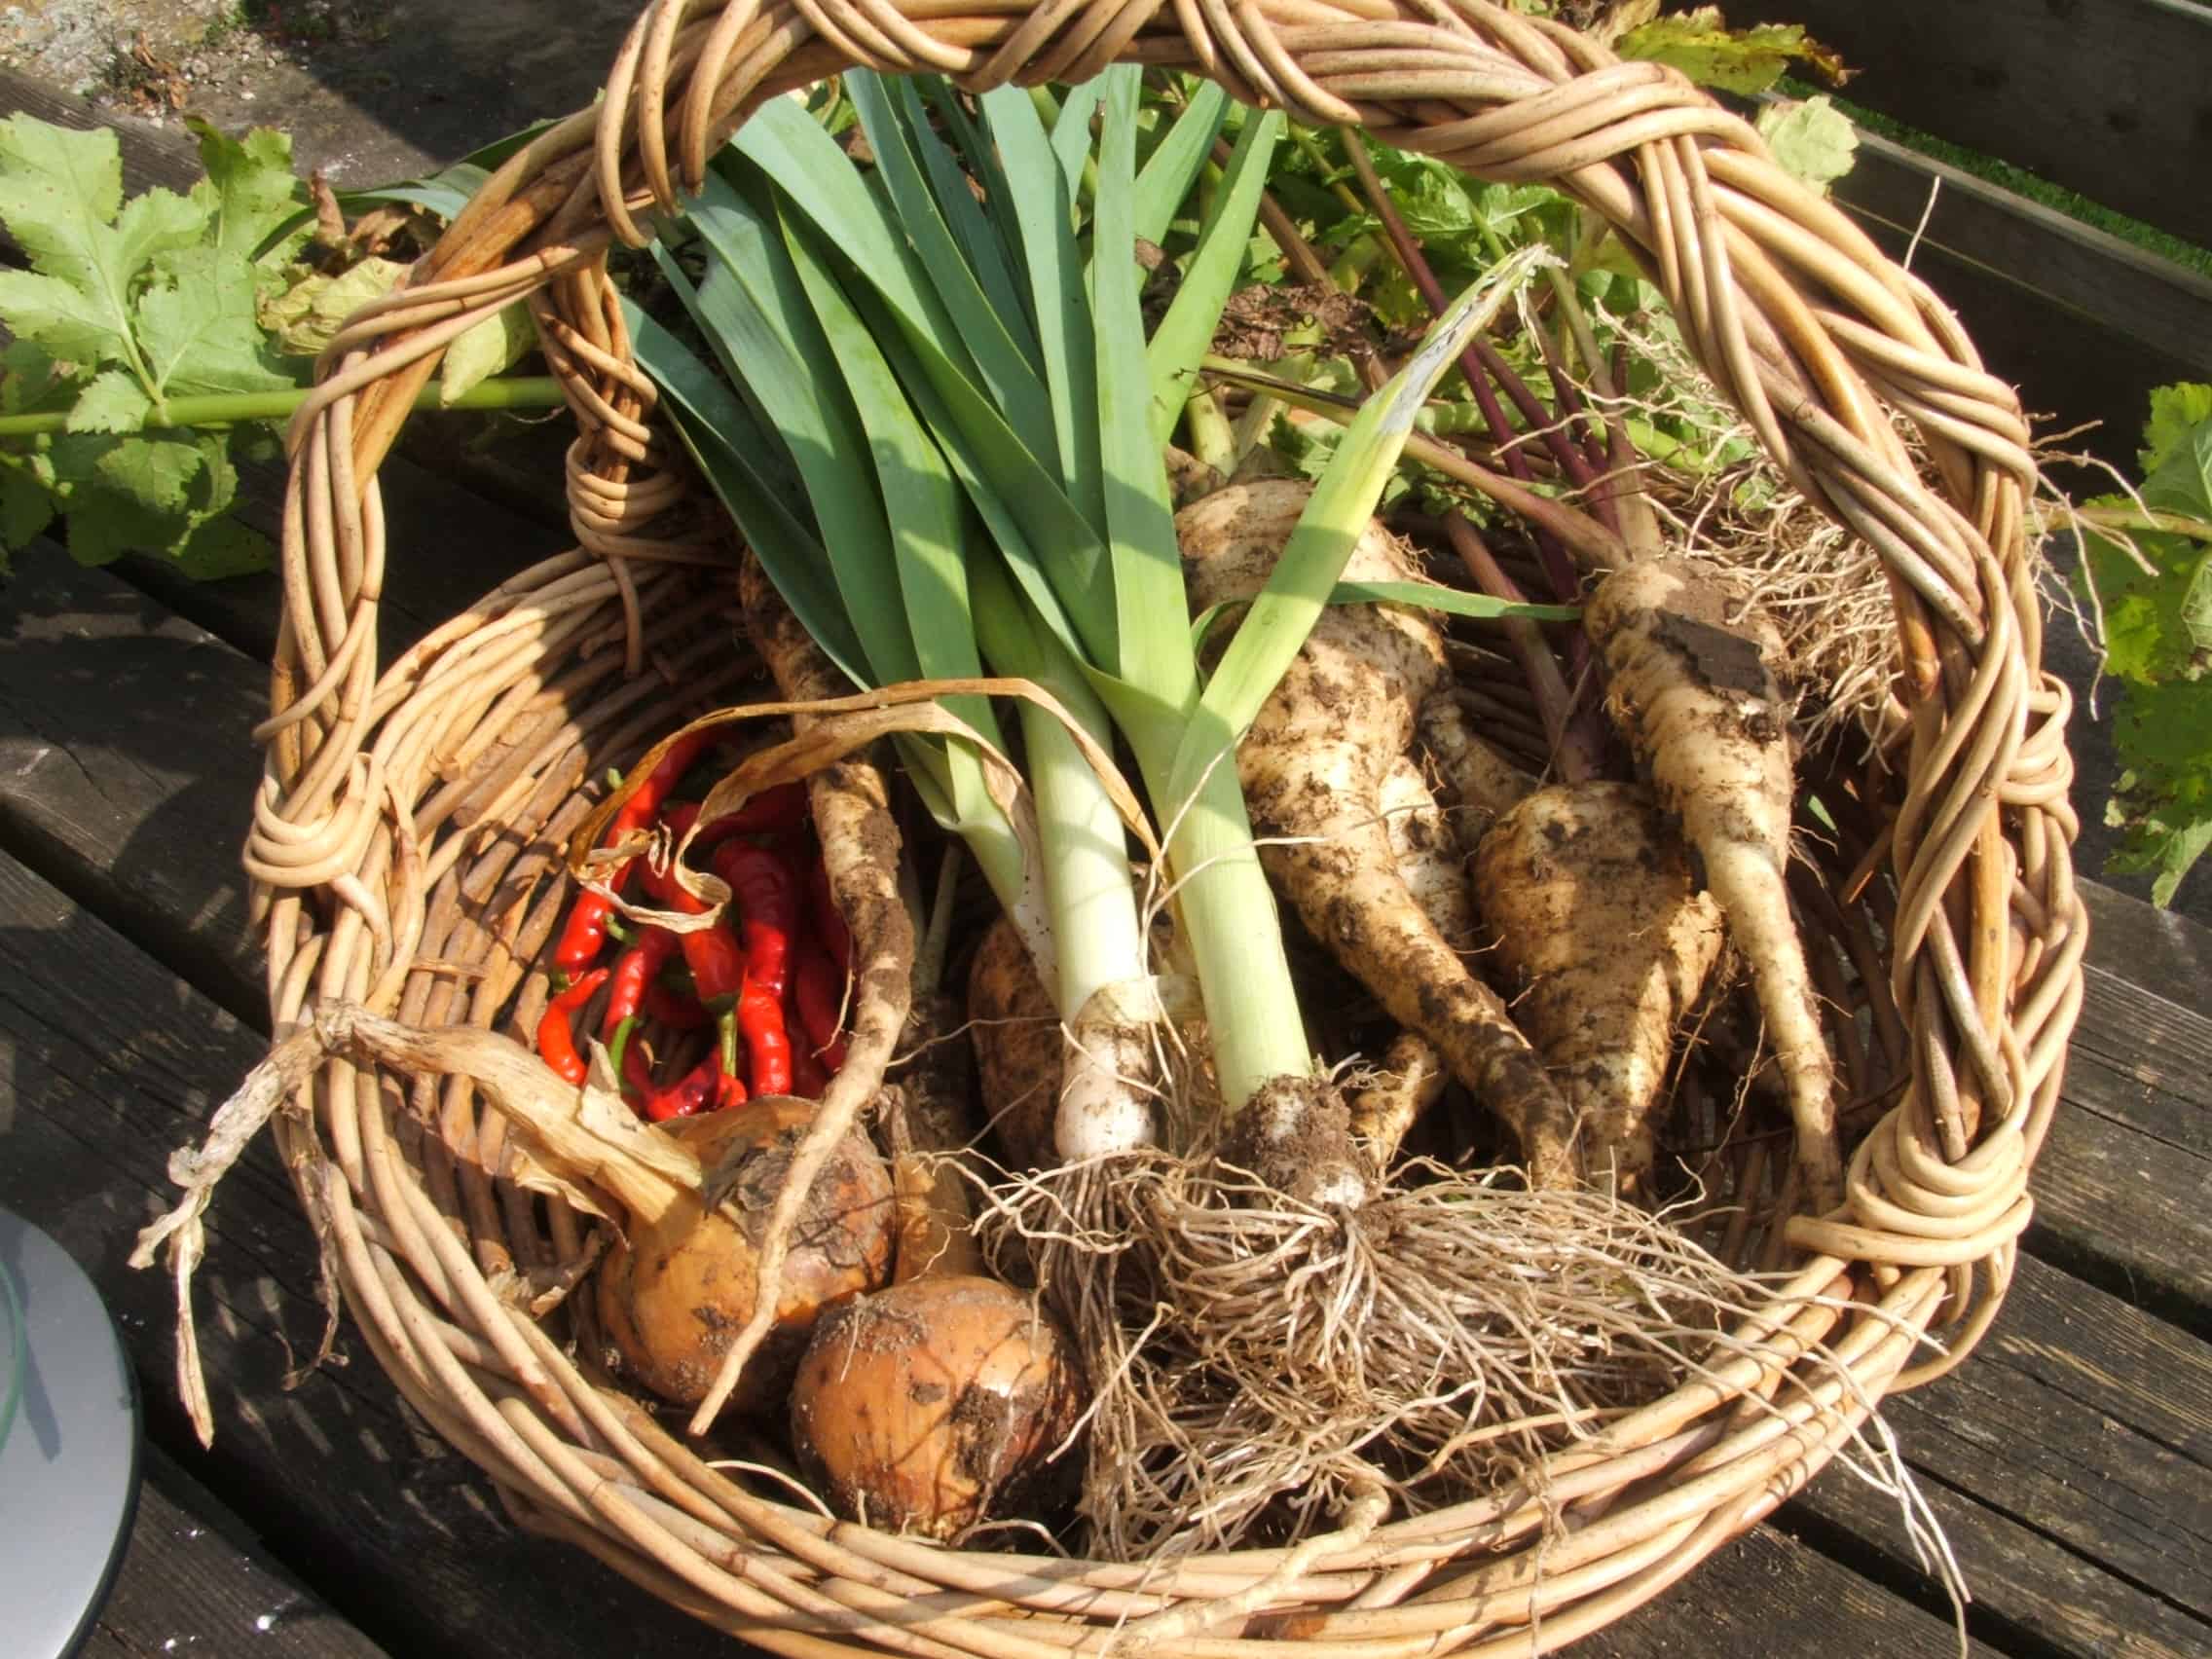 Wicker basket of homegrown leeks, chillies, muddy parsnips and onions